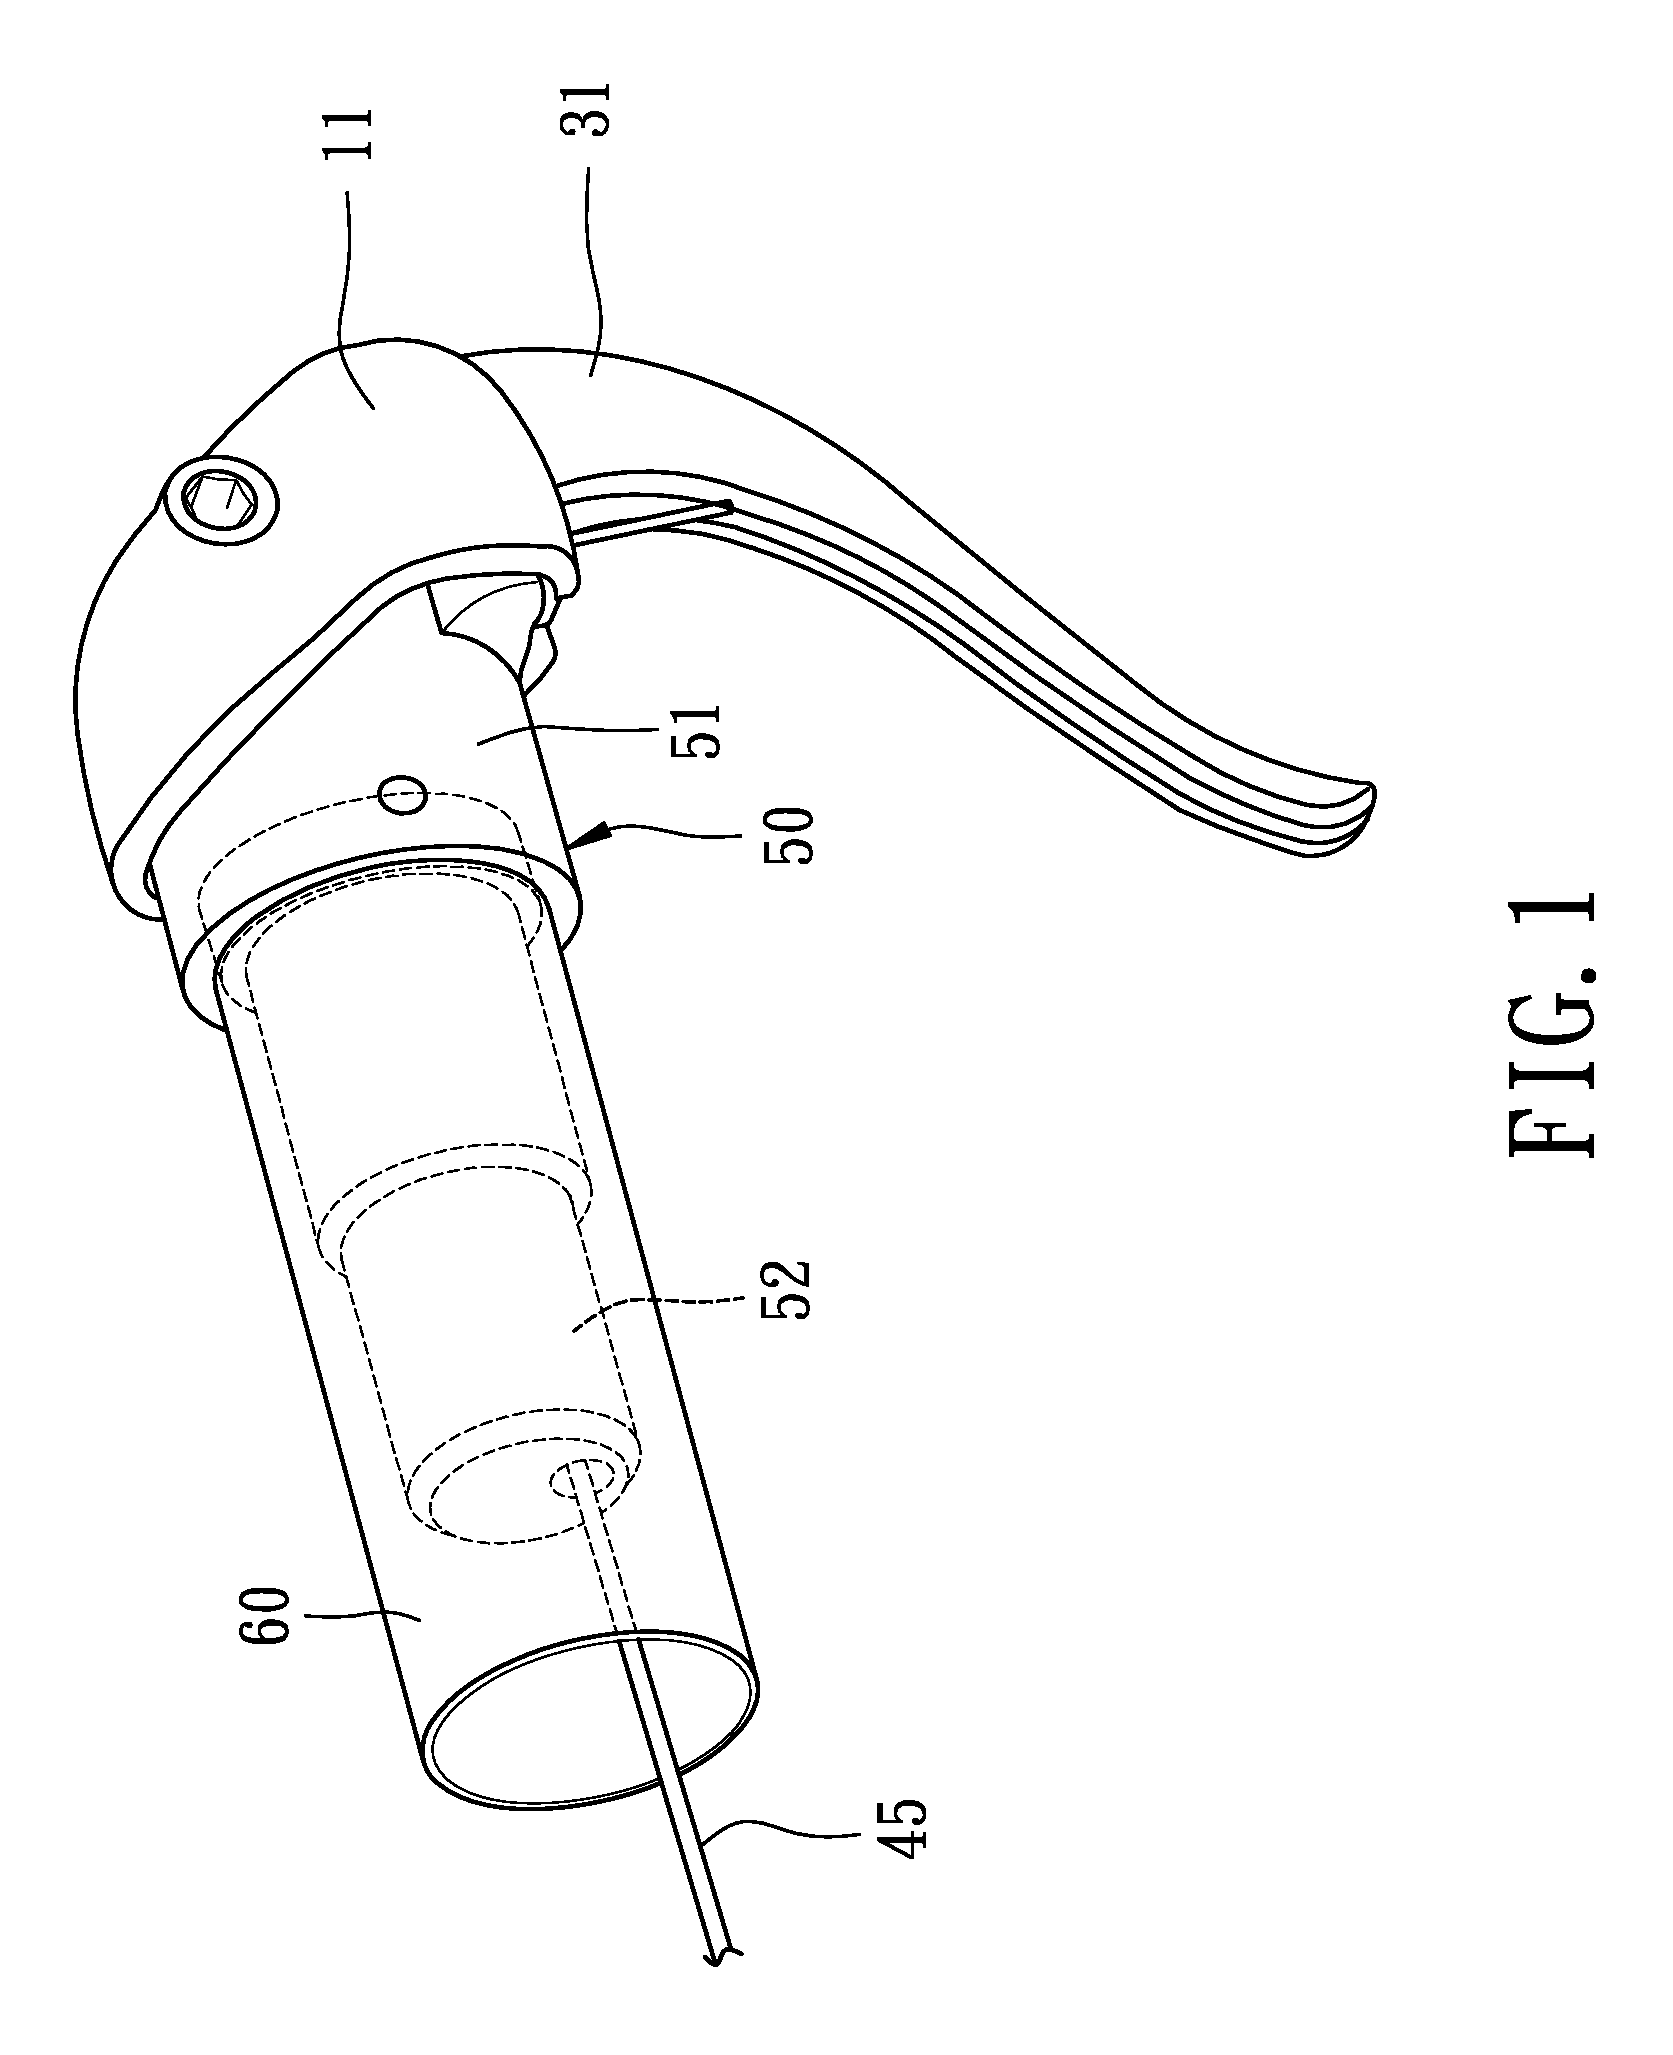 Bicycle shift control device